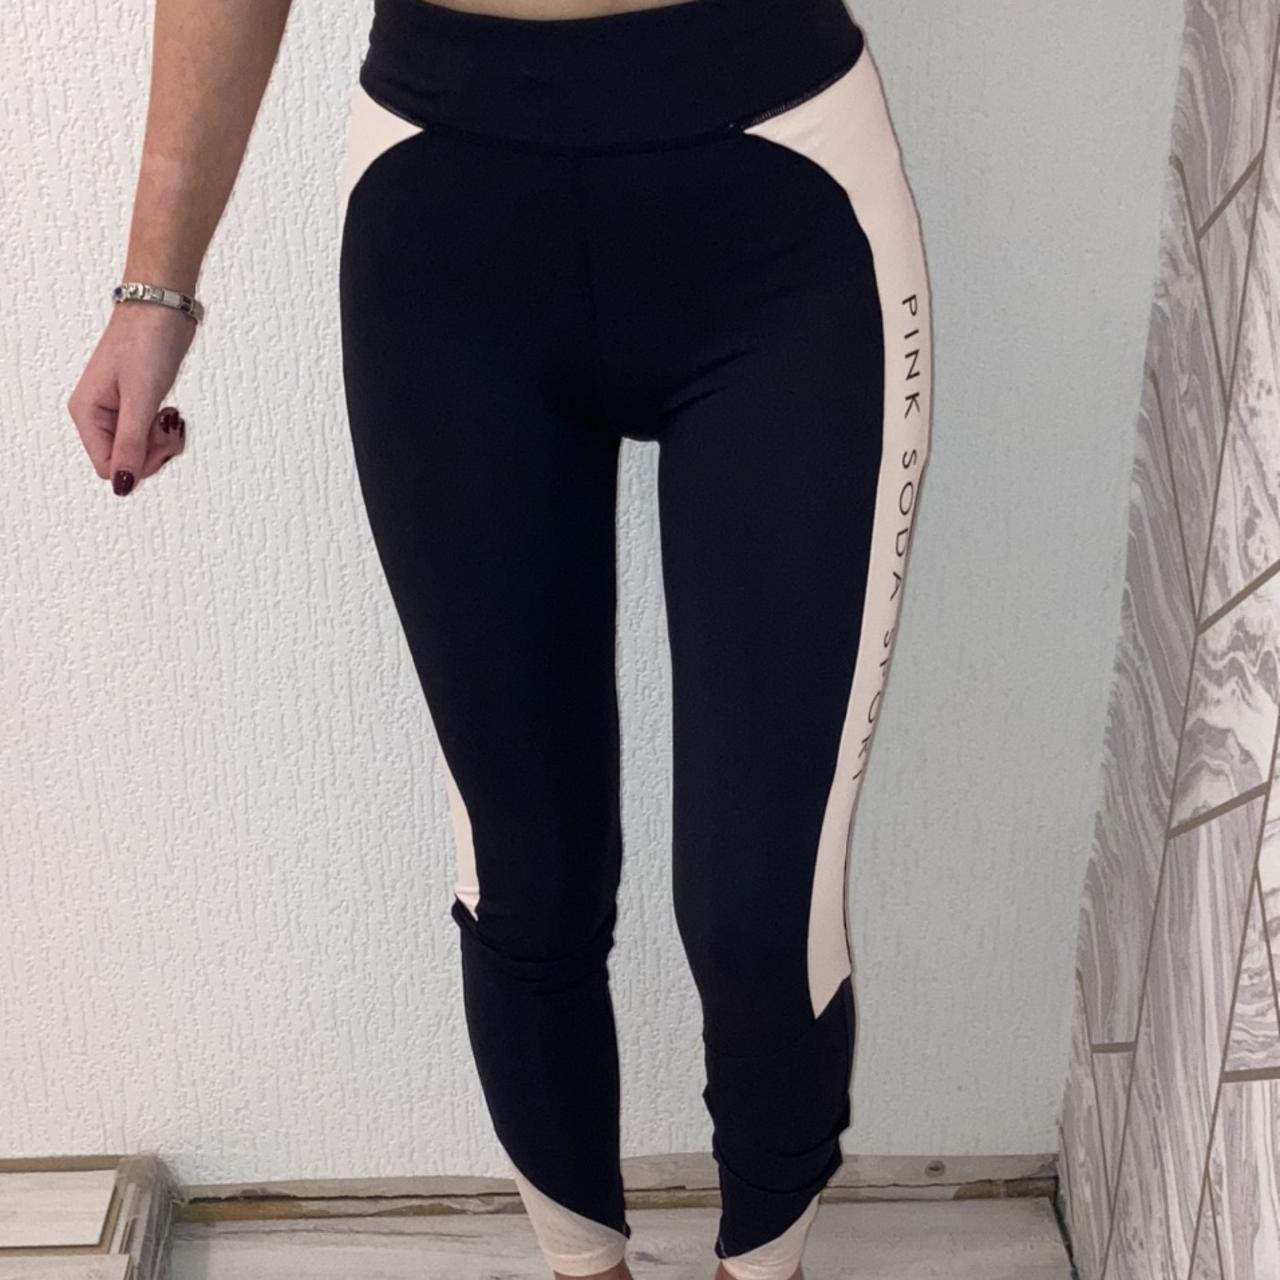 Size small pink and black pink soda leggings - Depop